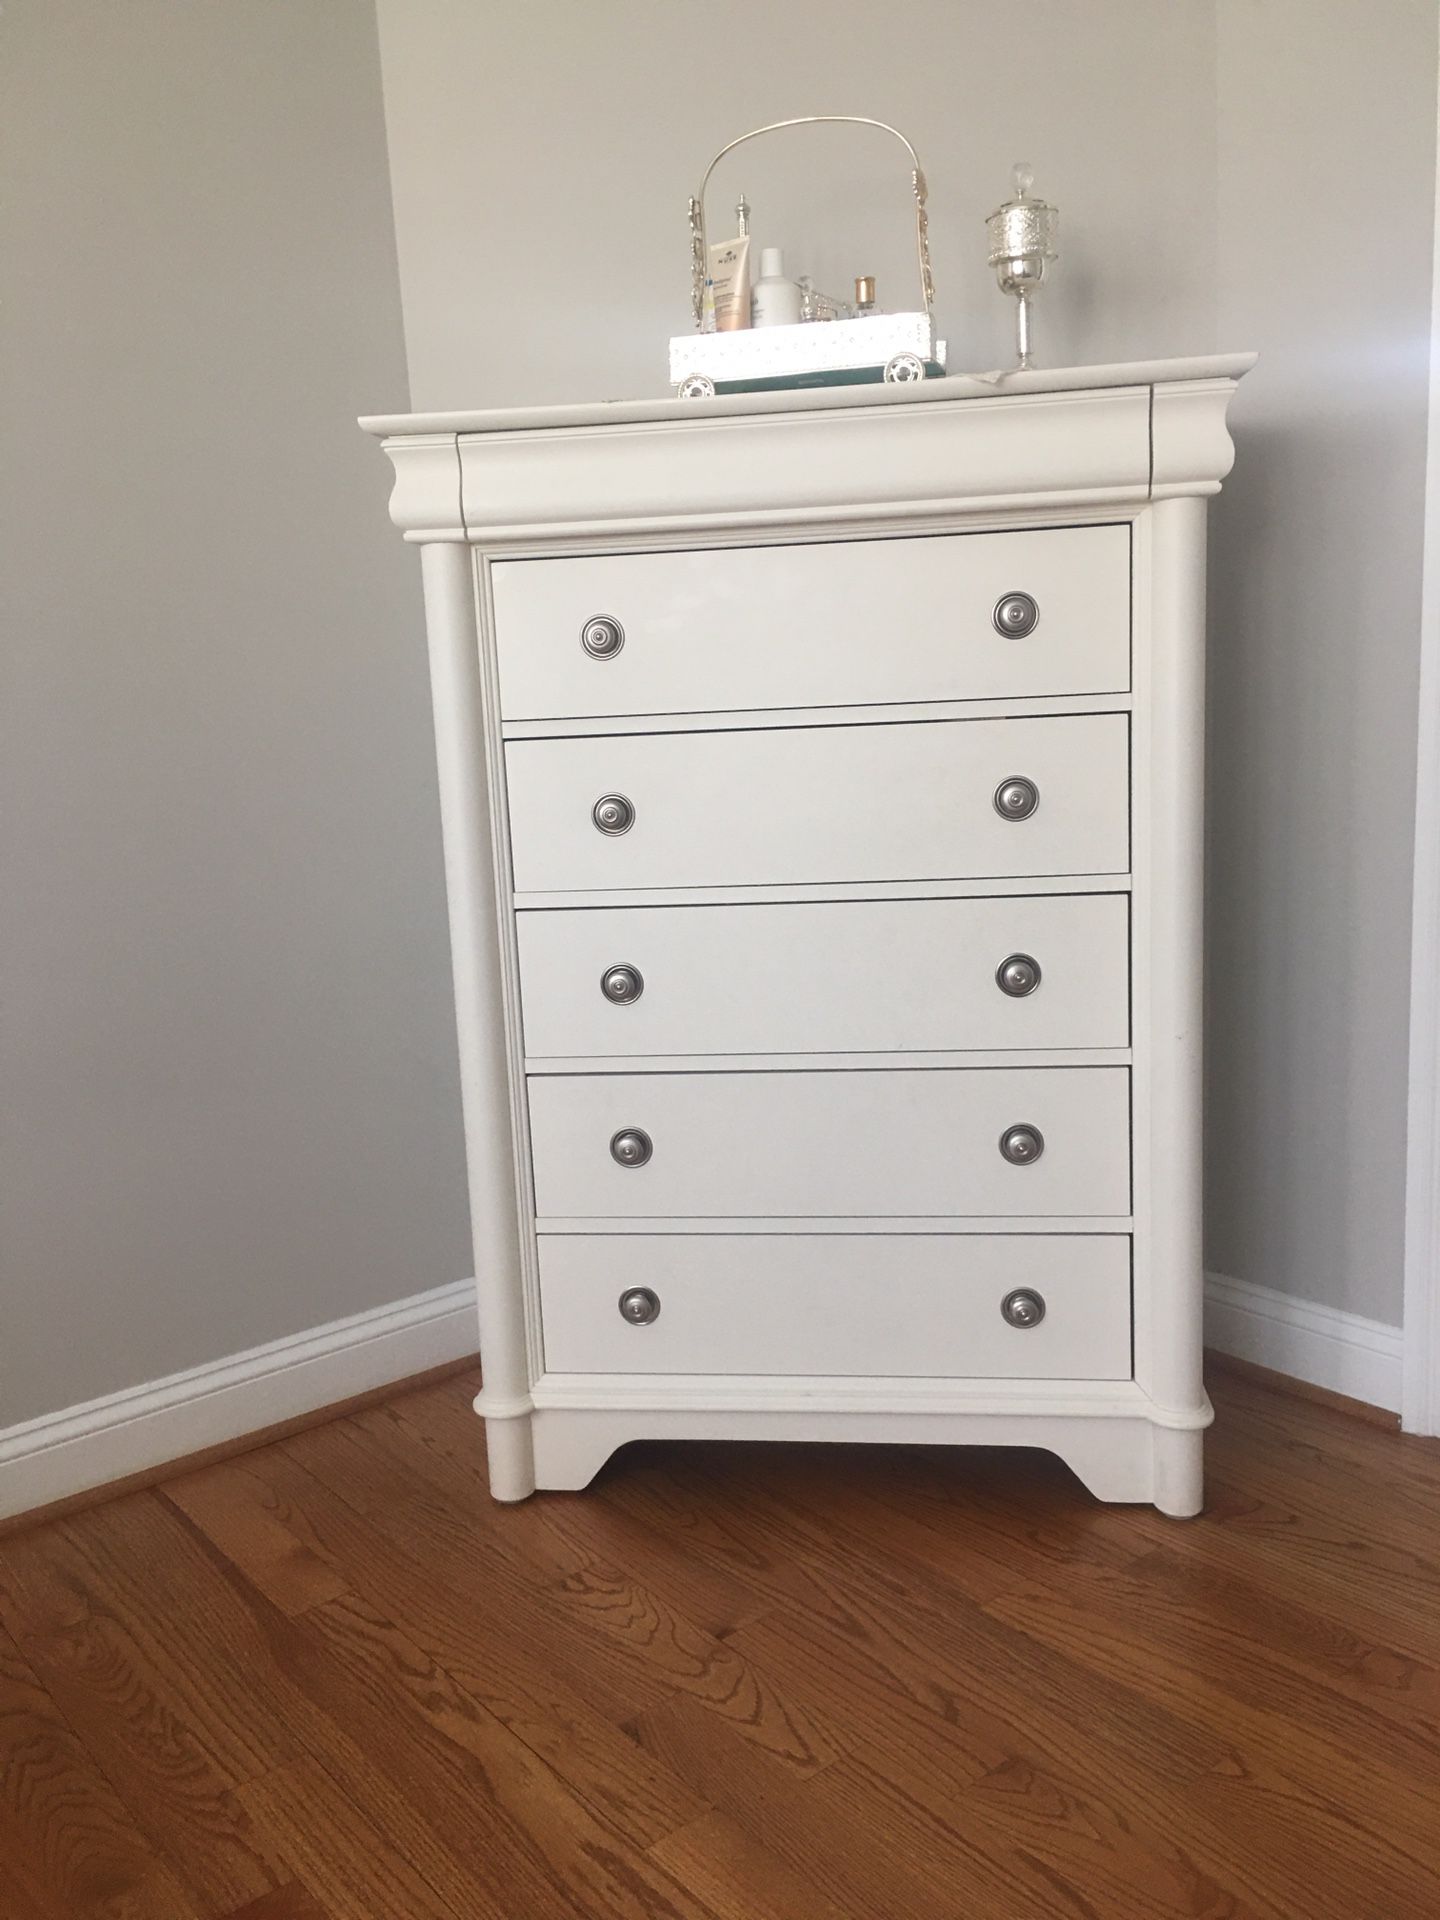 Dresser in Great Condition